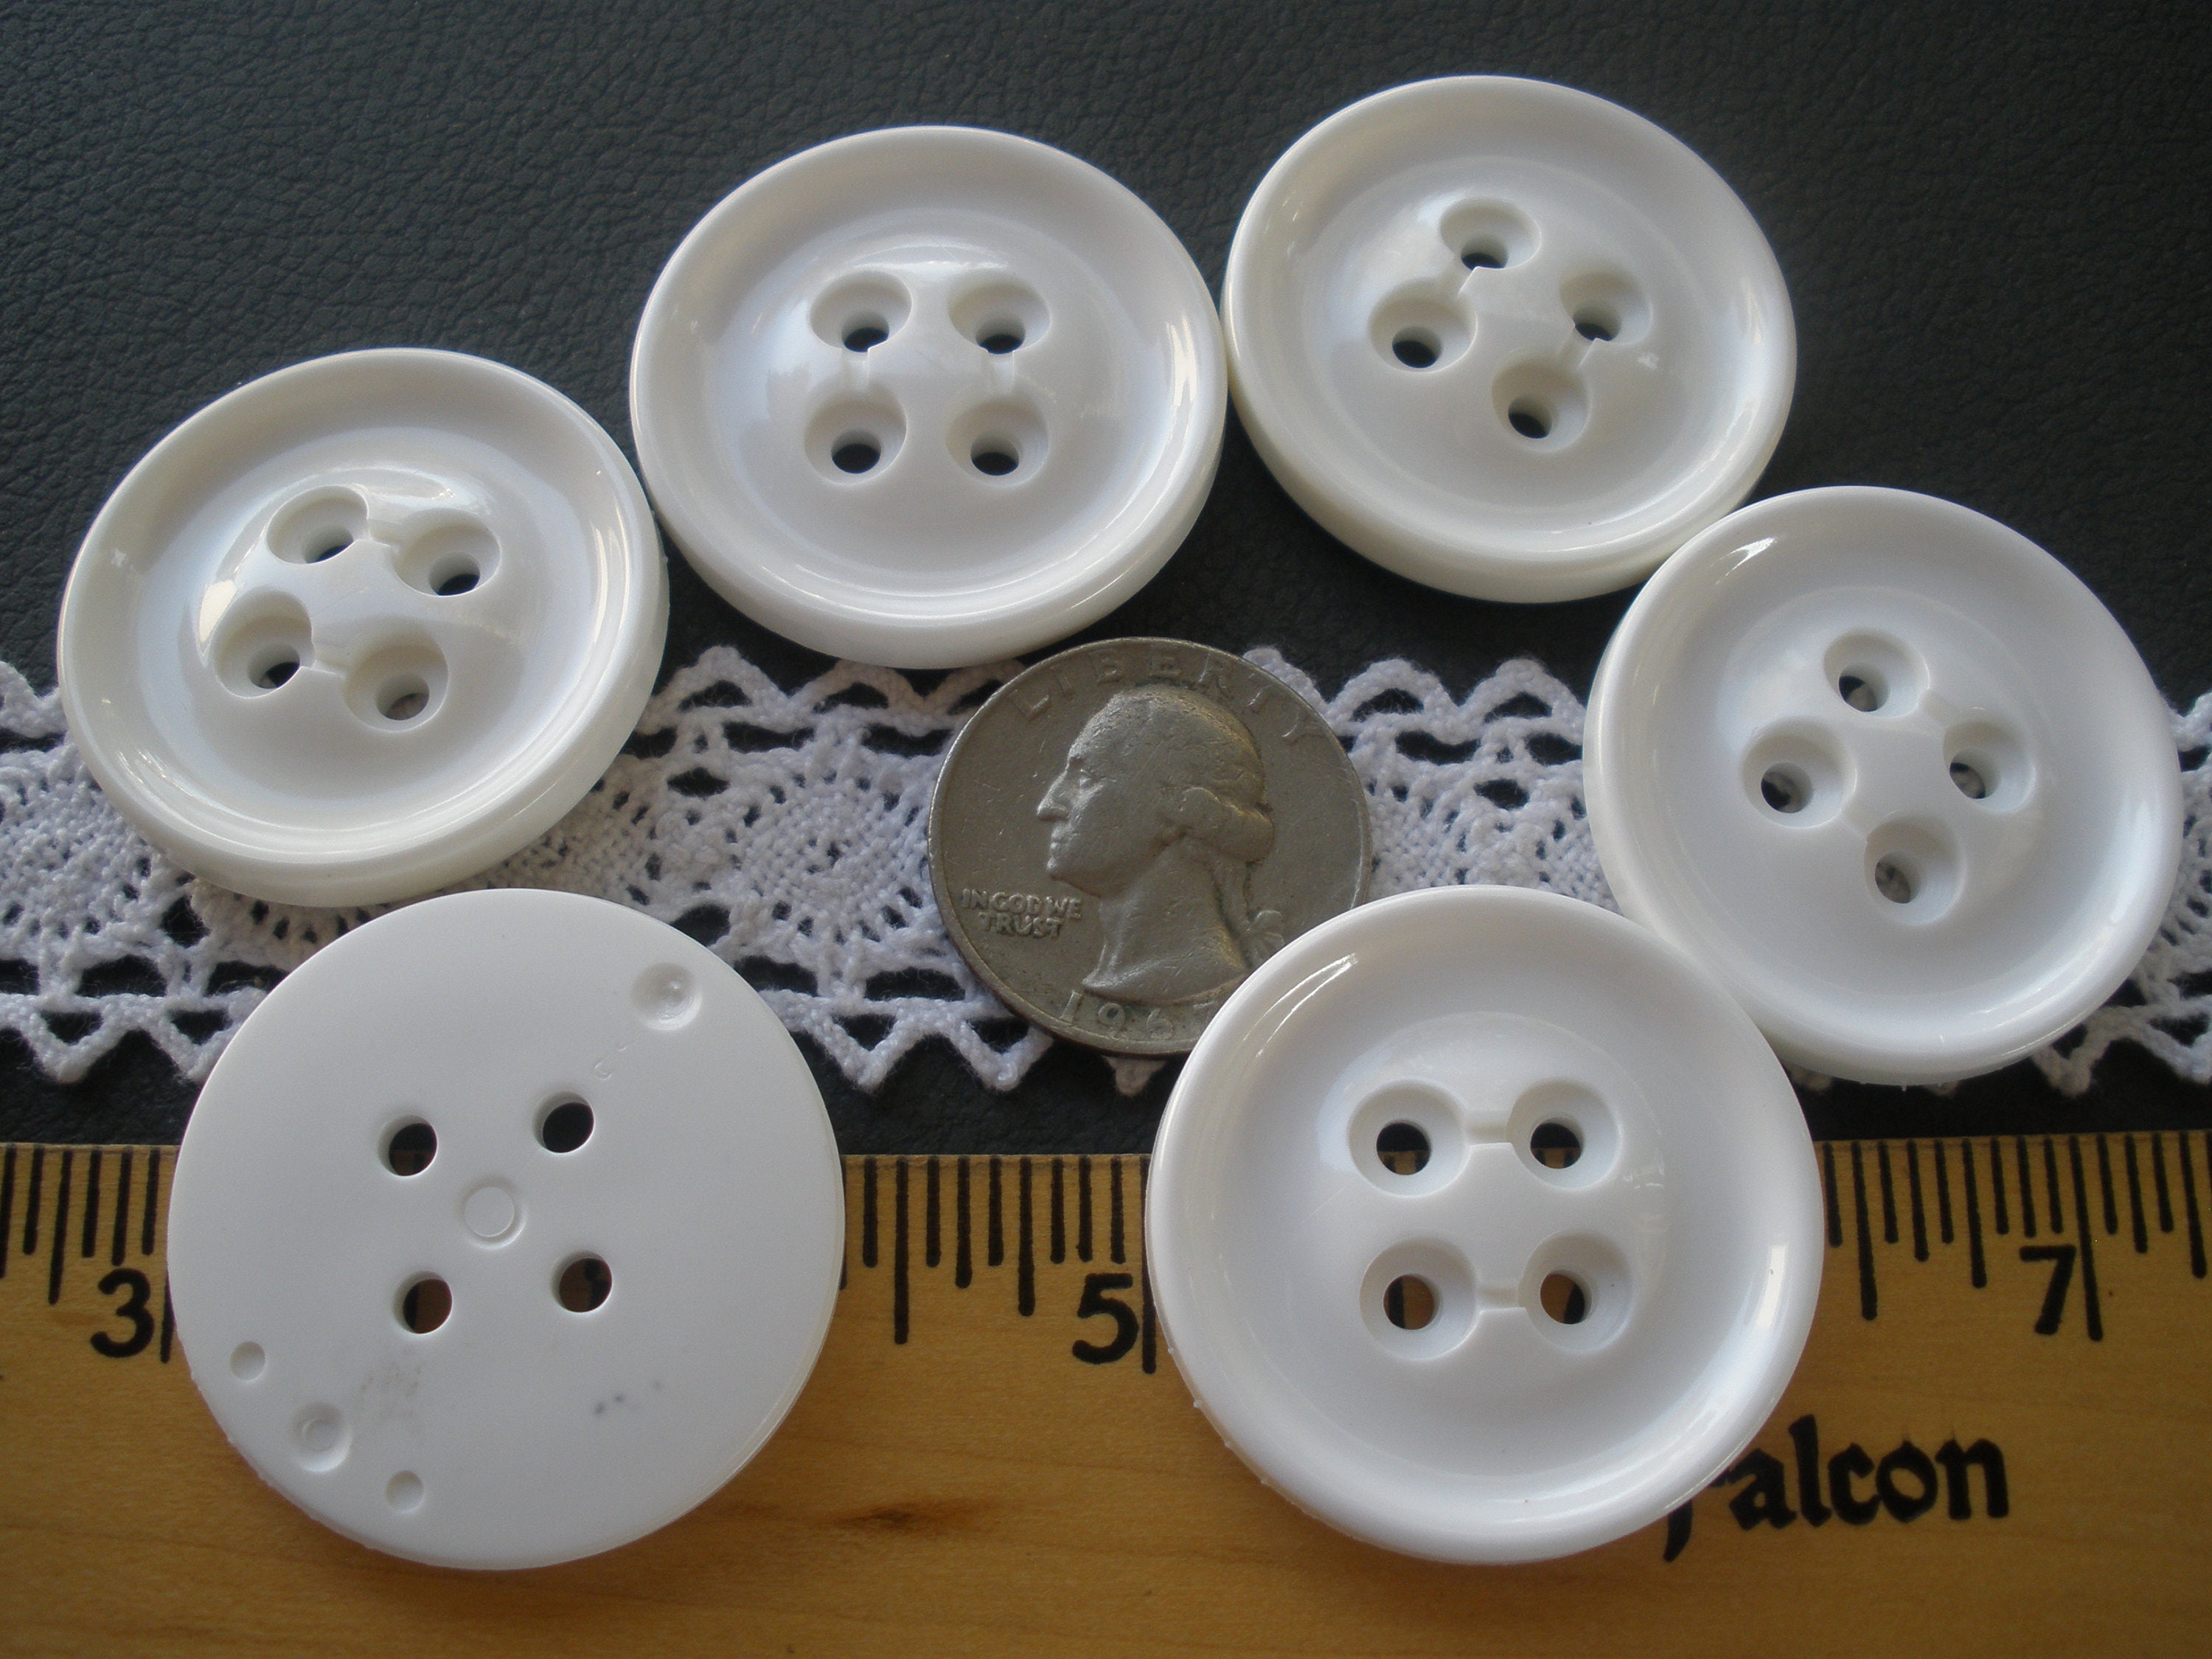 Oblong Wooden Buttons - 35 mm (1.4 inches), Accessories